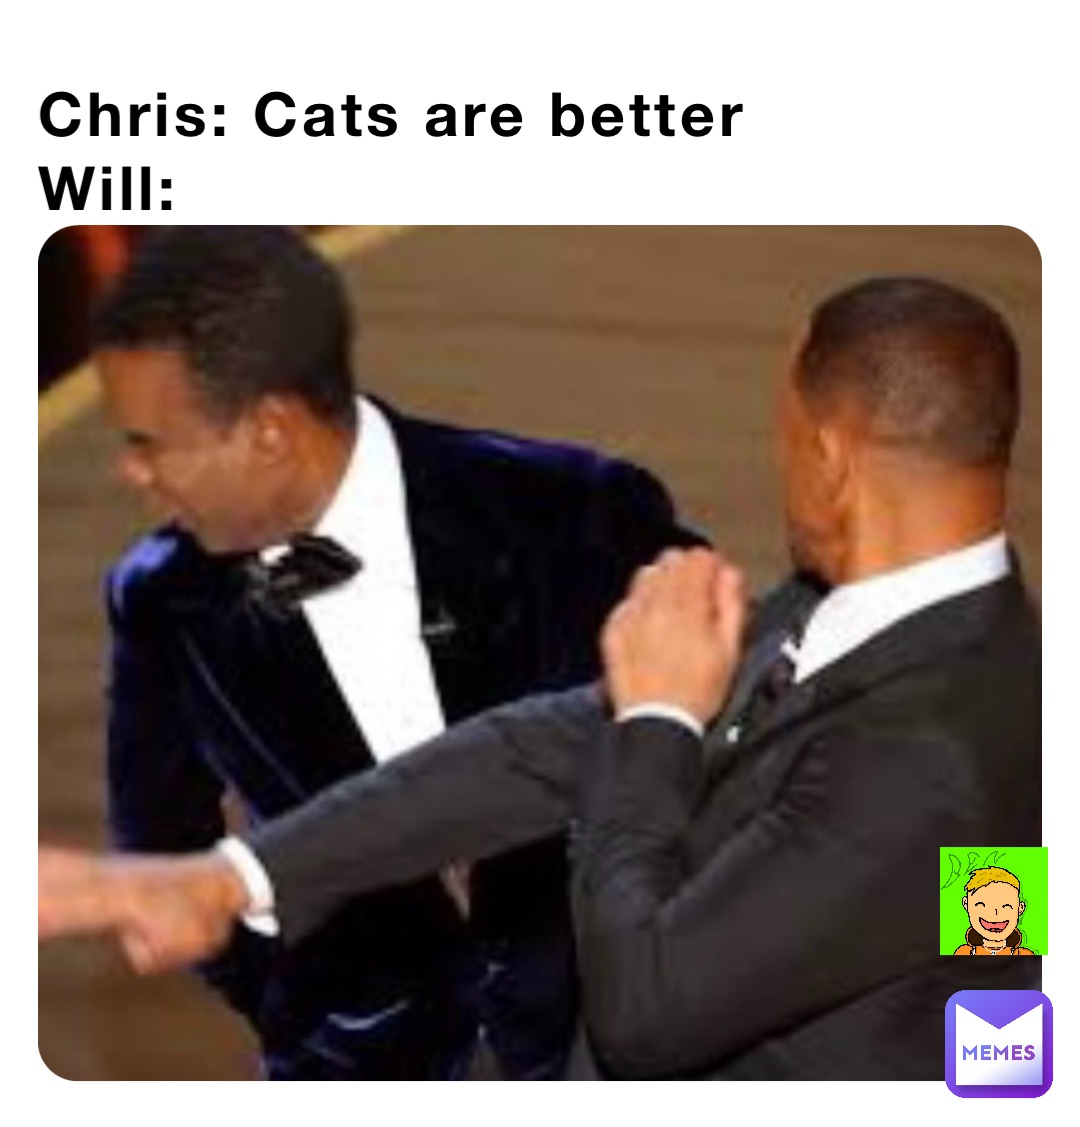 Chris: Cats are better
Will: